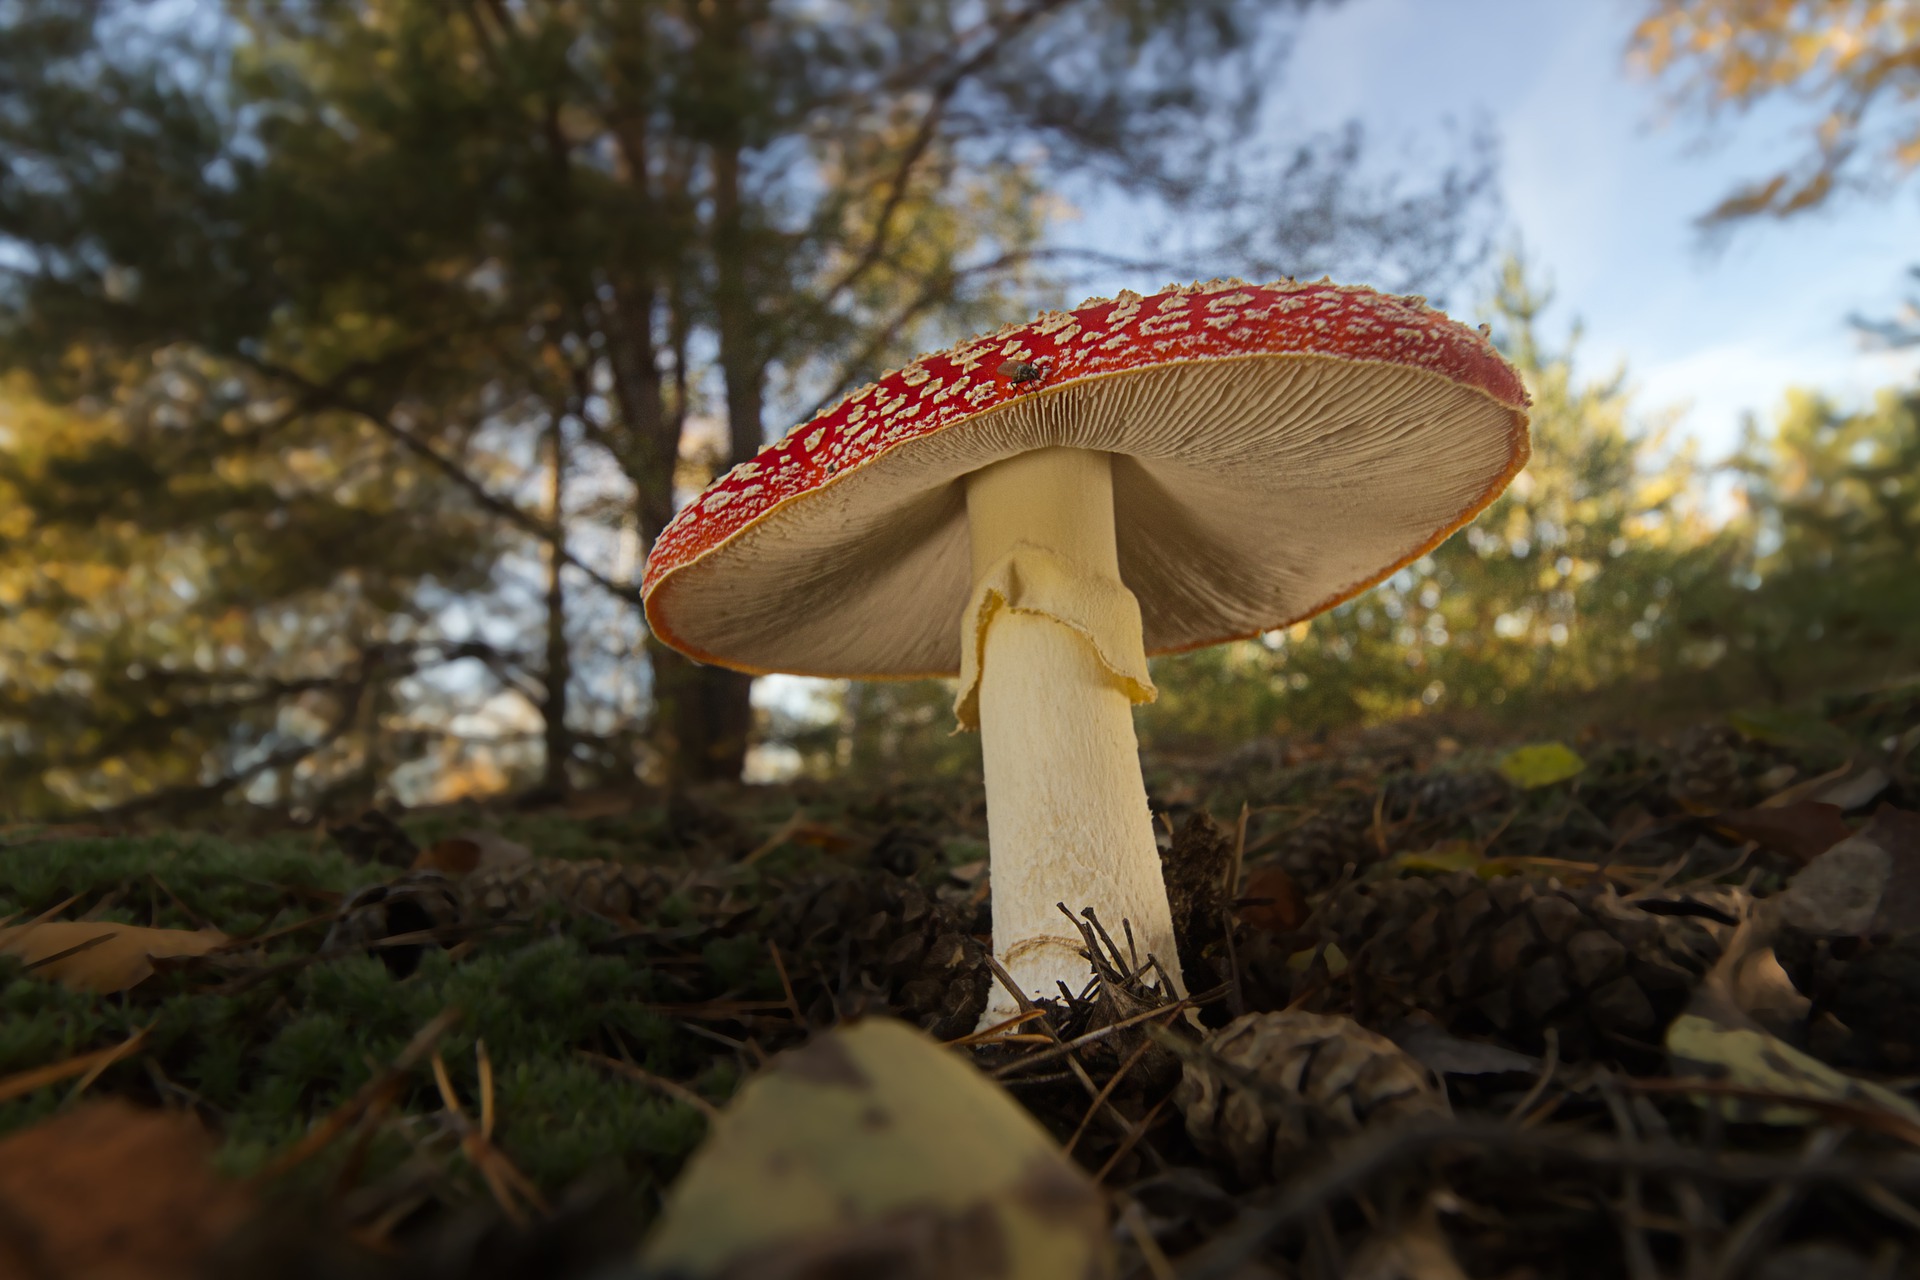 Amanita muscaria, what’s all the fuss about?